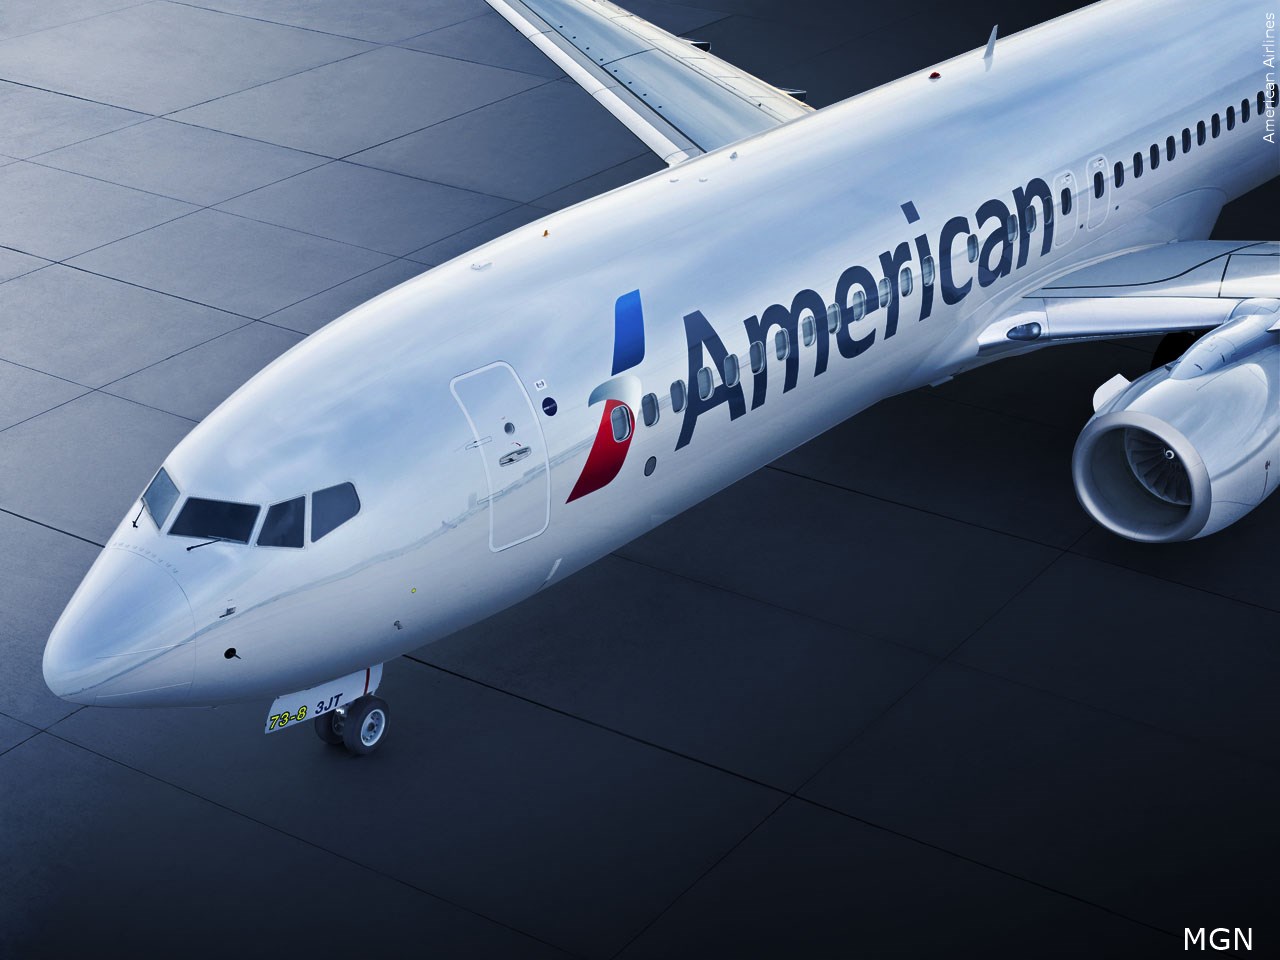 American Airlines Launches New Class of Cabin Service!, follow News Without Politics, subscribe to News Without Politics, informative unbiased news source, travel